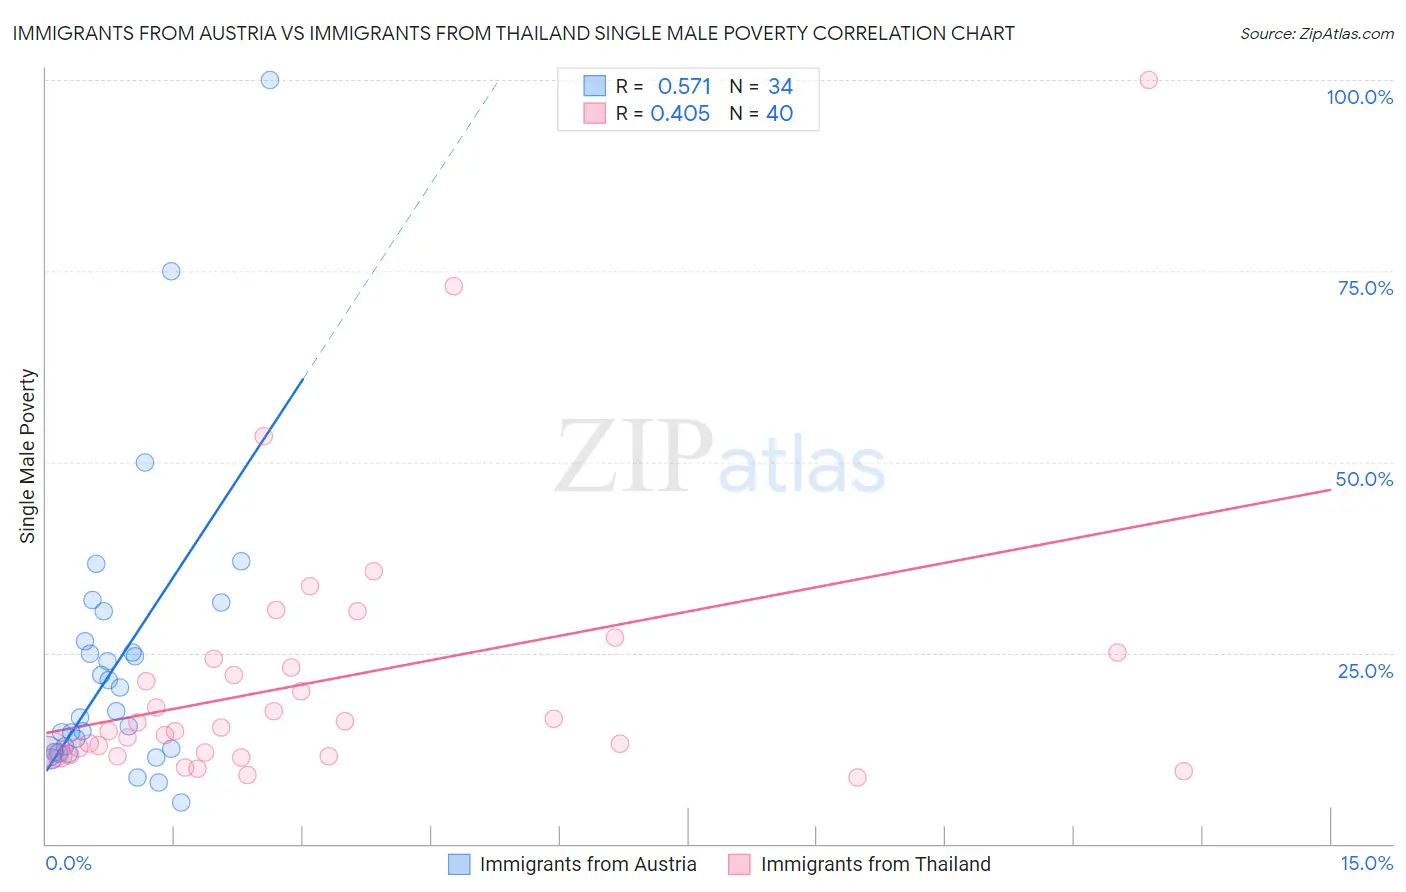 Immigrants from Austria vs Immigrants from Thailand Single Male Poverty